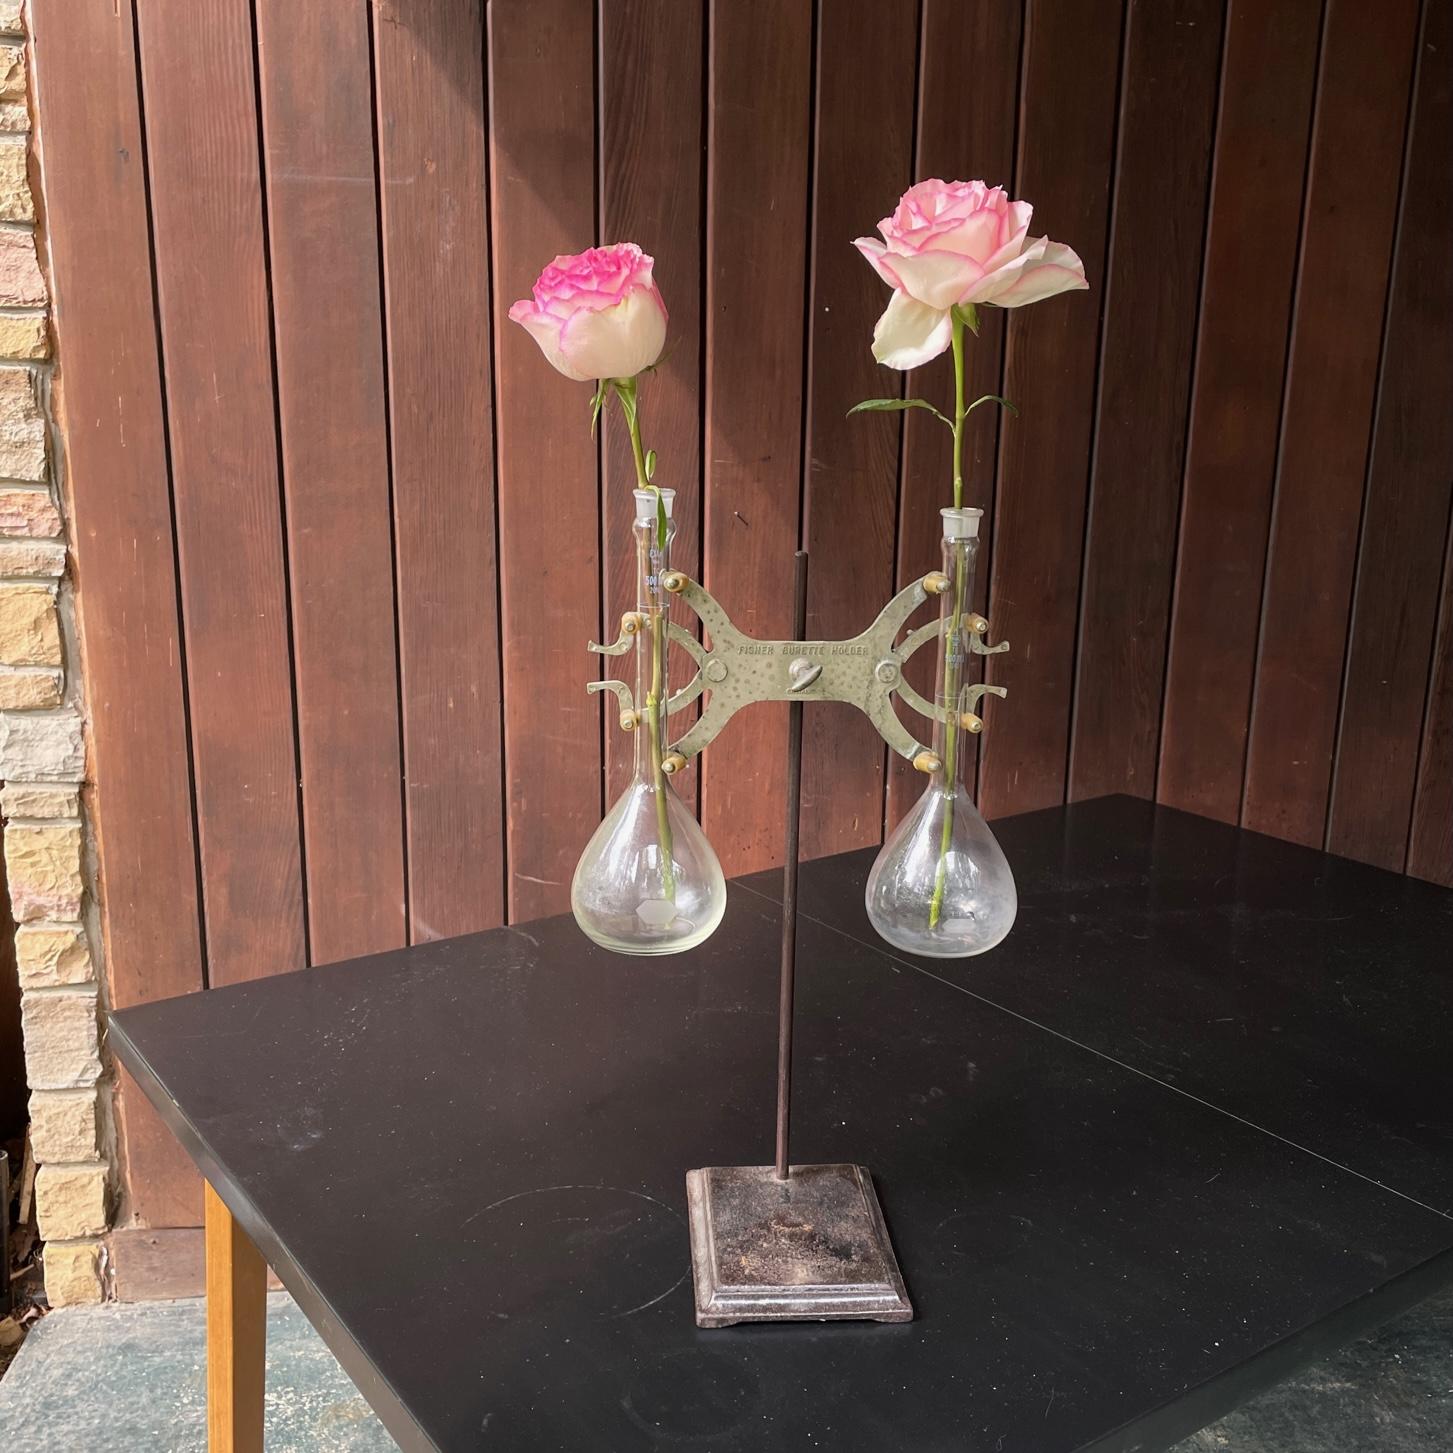 Repurposed lab equipment to create a beautiful table or entryway decor.

Overall W 11.5 x D 7 x H 20 in.
Vases H 11.5 in. / Capacity 16 oz.